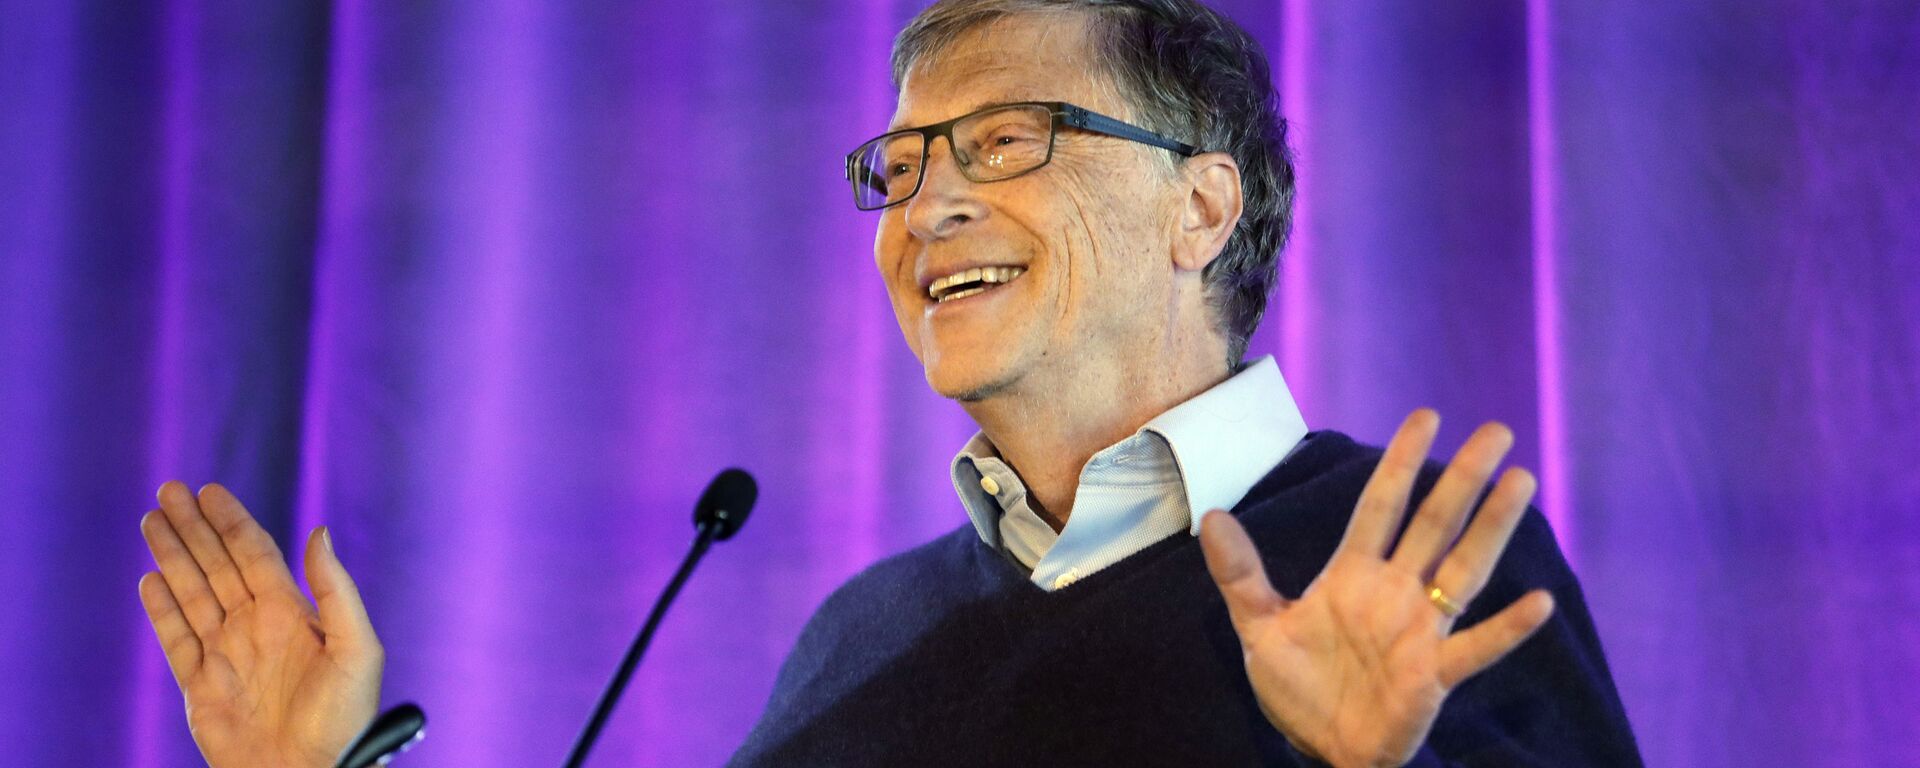 Microsoft co-founder Bill Gates speaks at the opening of the Bill & Melinda Gates Center for Computer Science and Engineering at the University of Washington, Thursday, 28 February 2019, in Seattle, Washington.  - Sputnik International, 1920, 27.01.2021